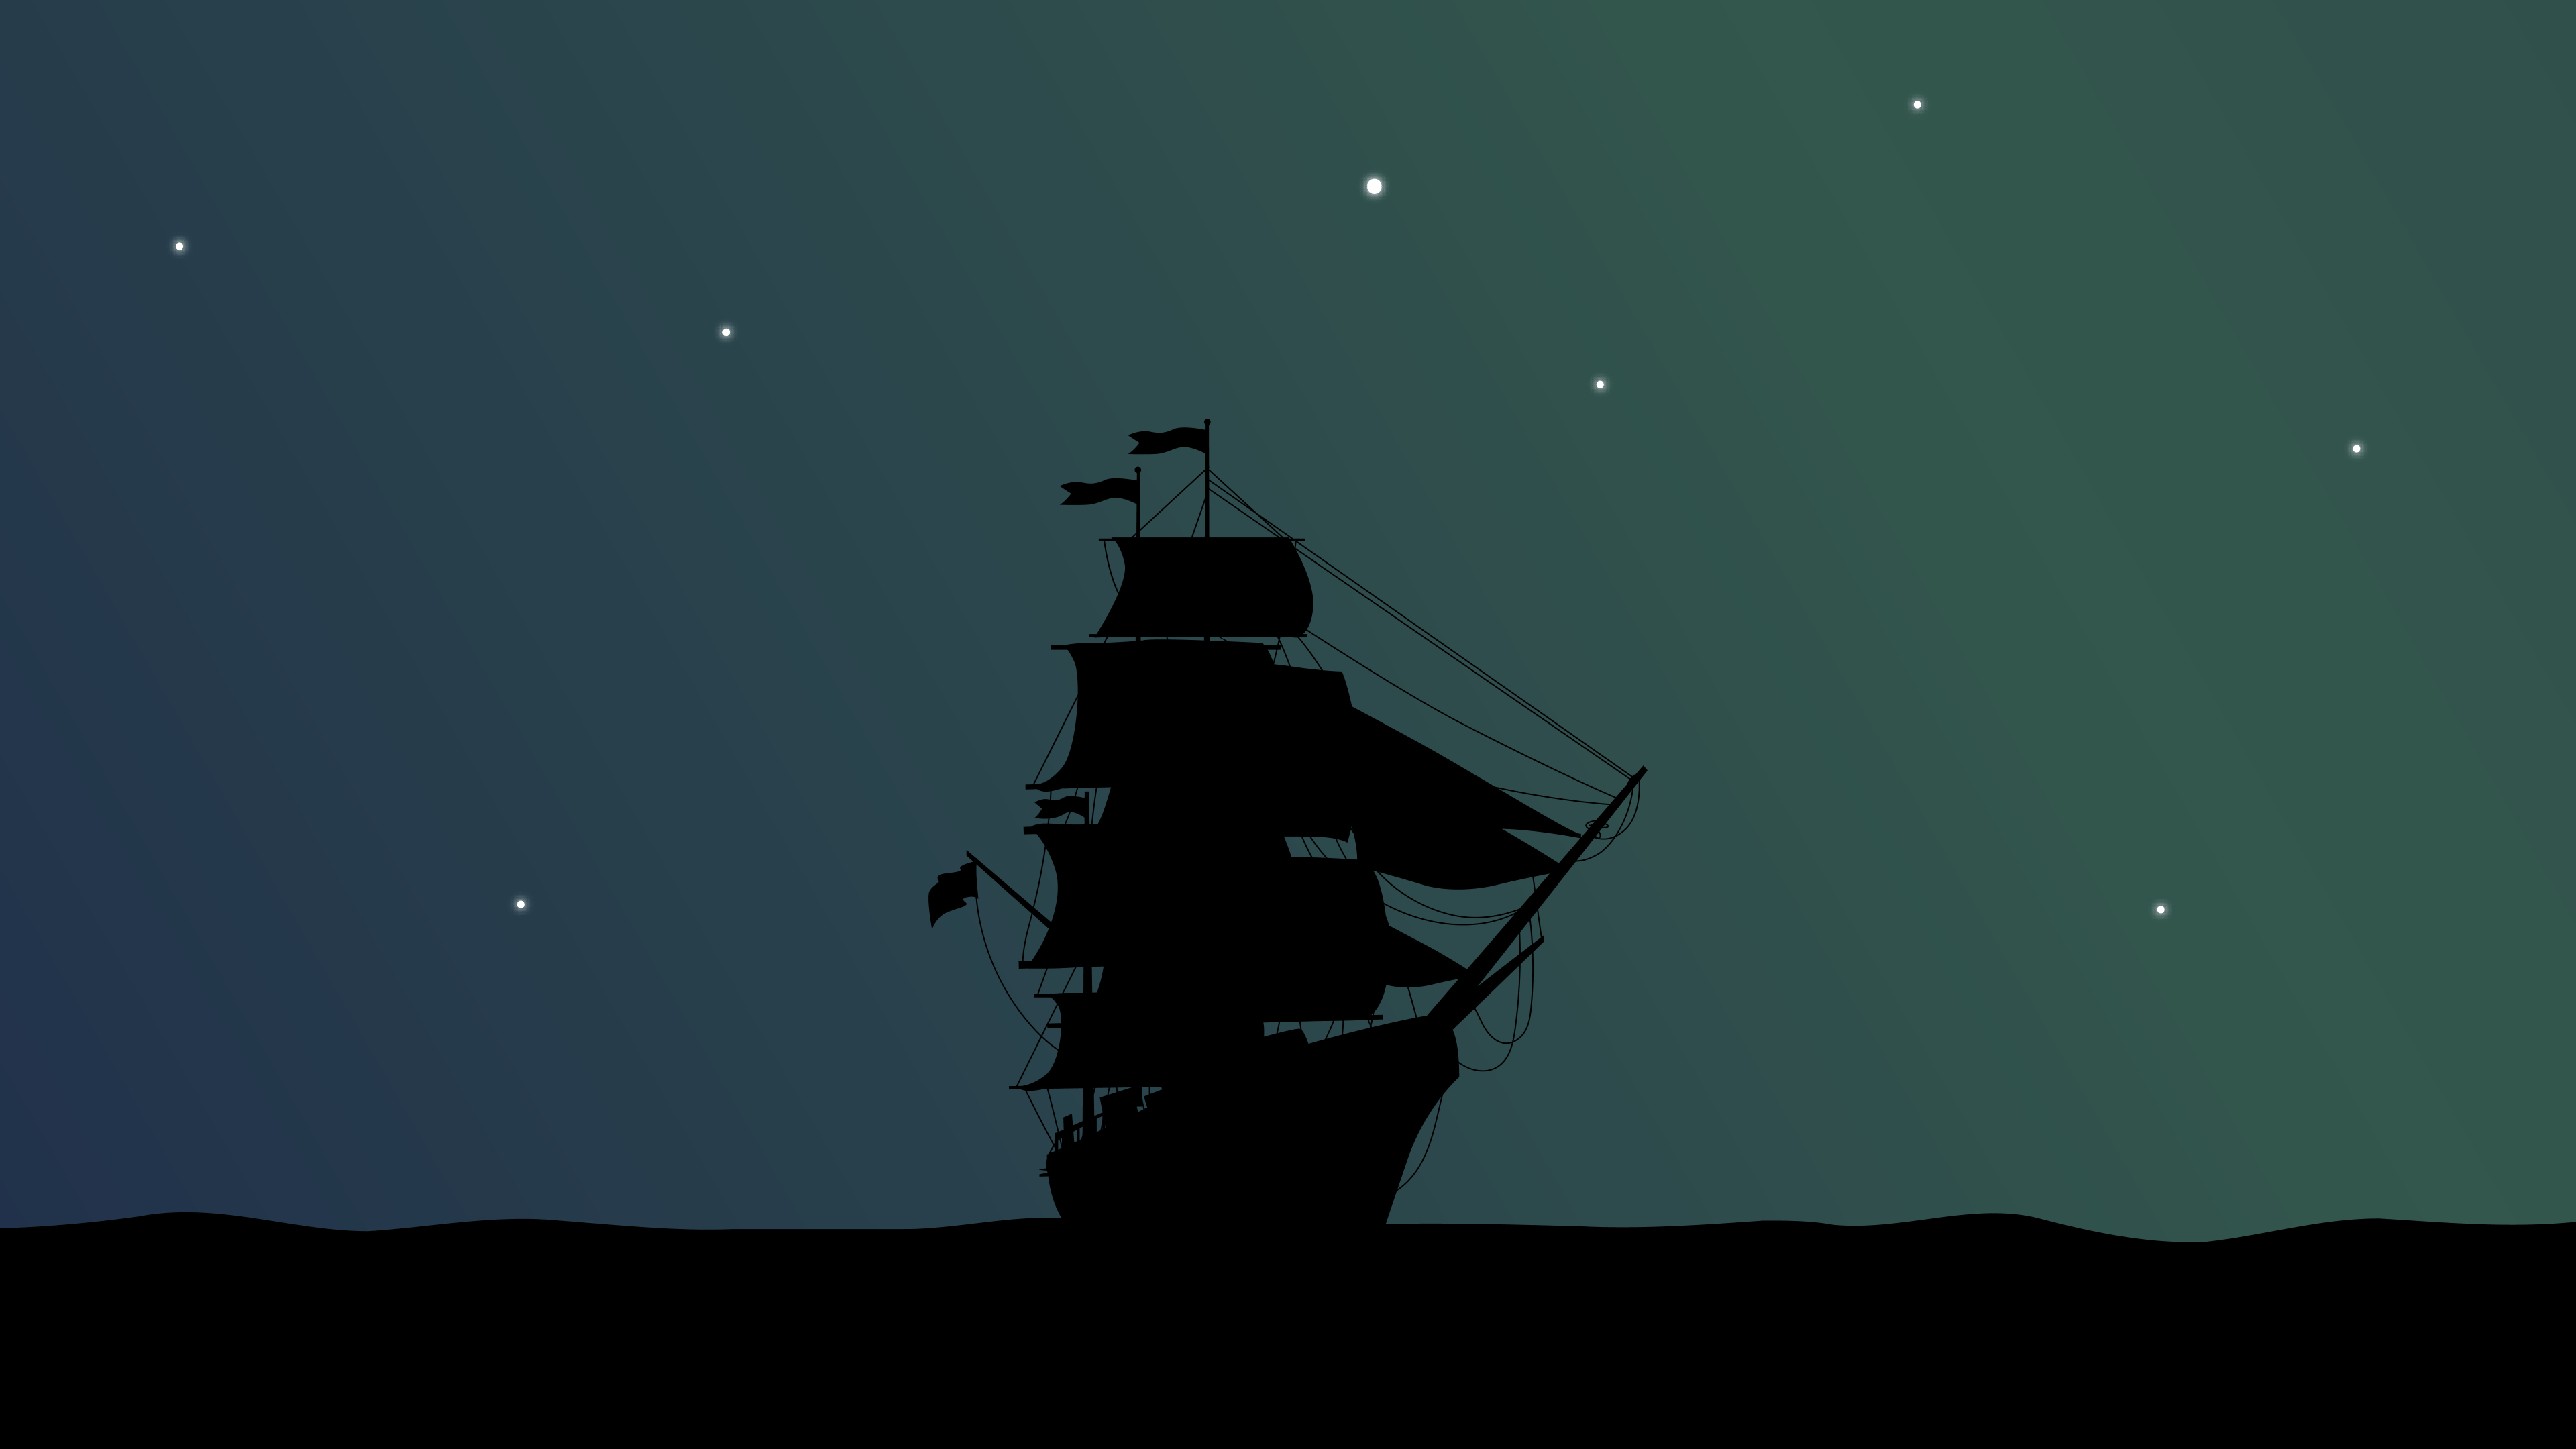 Pirate 4K wallpaper for your desktop or mobile screen free and easy to download